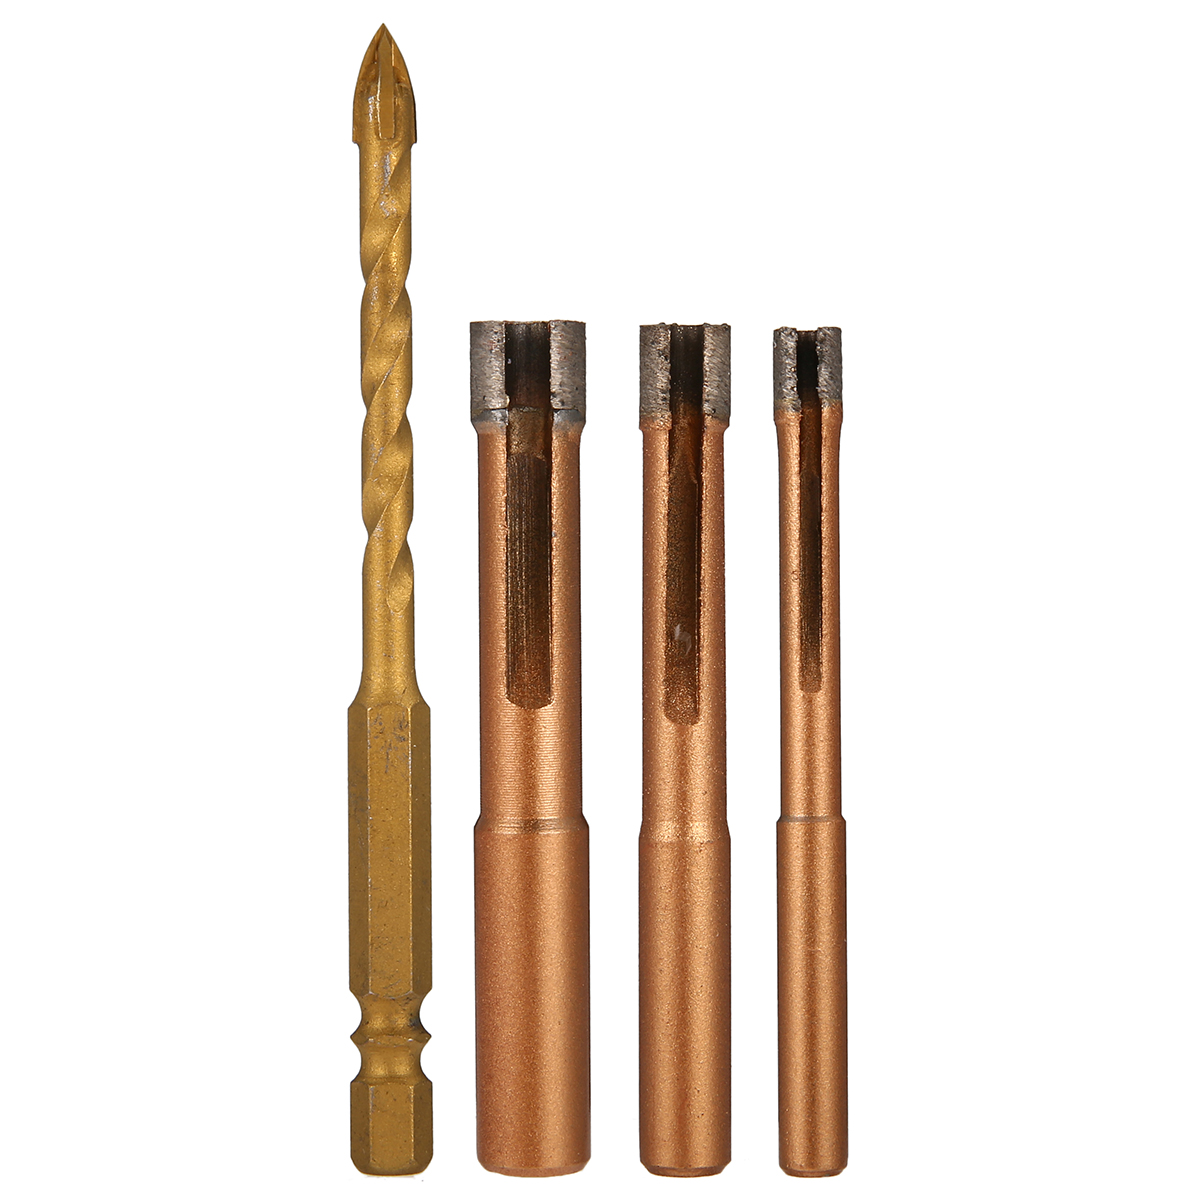 Drillpro-4pcs-Hole-Saw-Cutter-Drill-Bit-Set-For-Tile-Ceramic-Glass-Marble-1125415-4